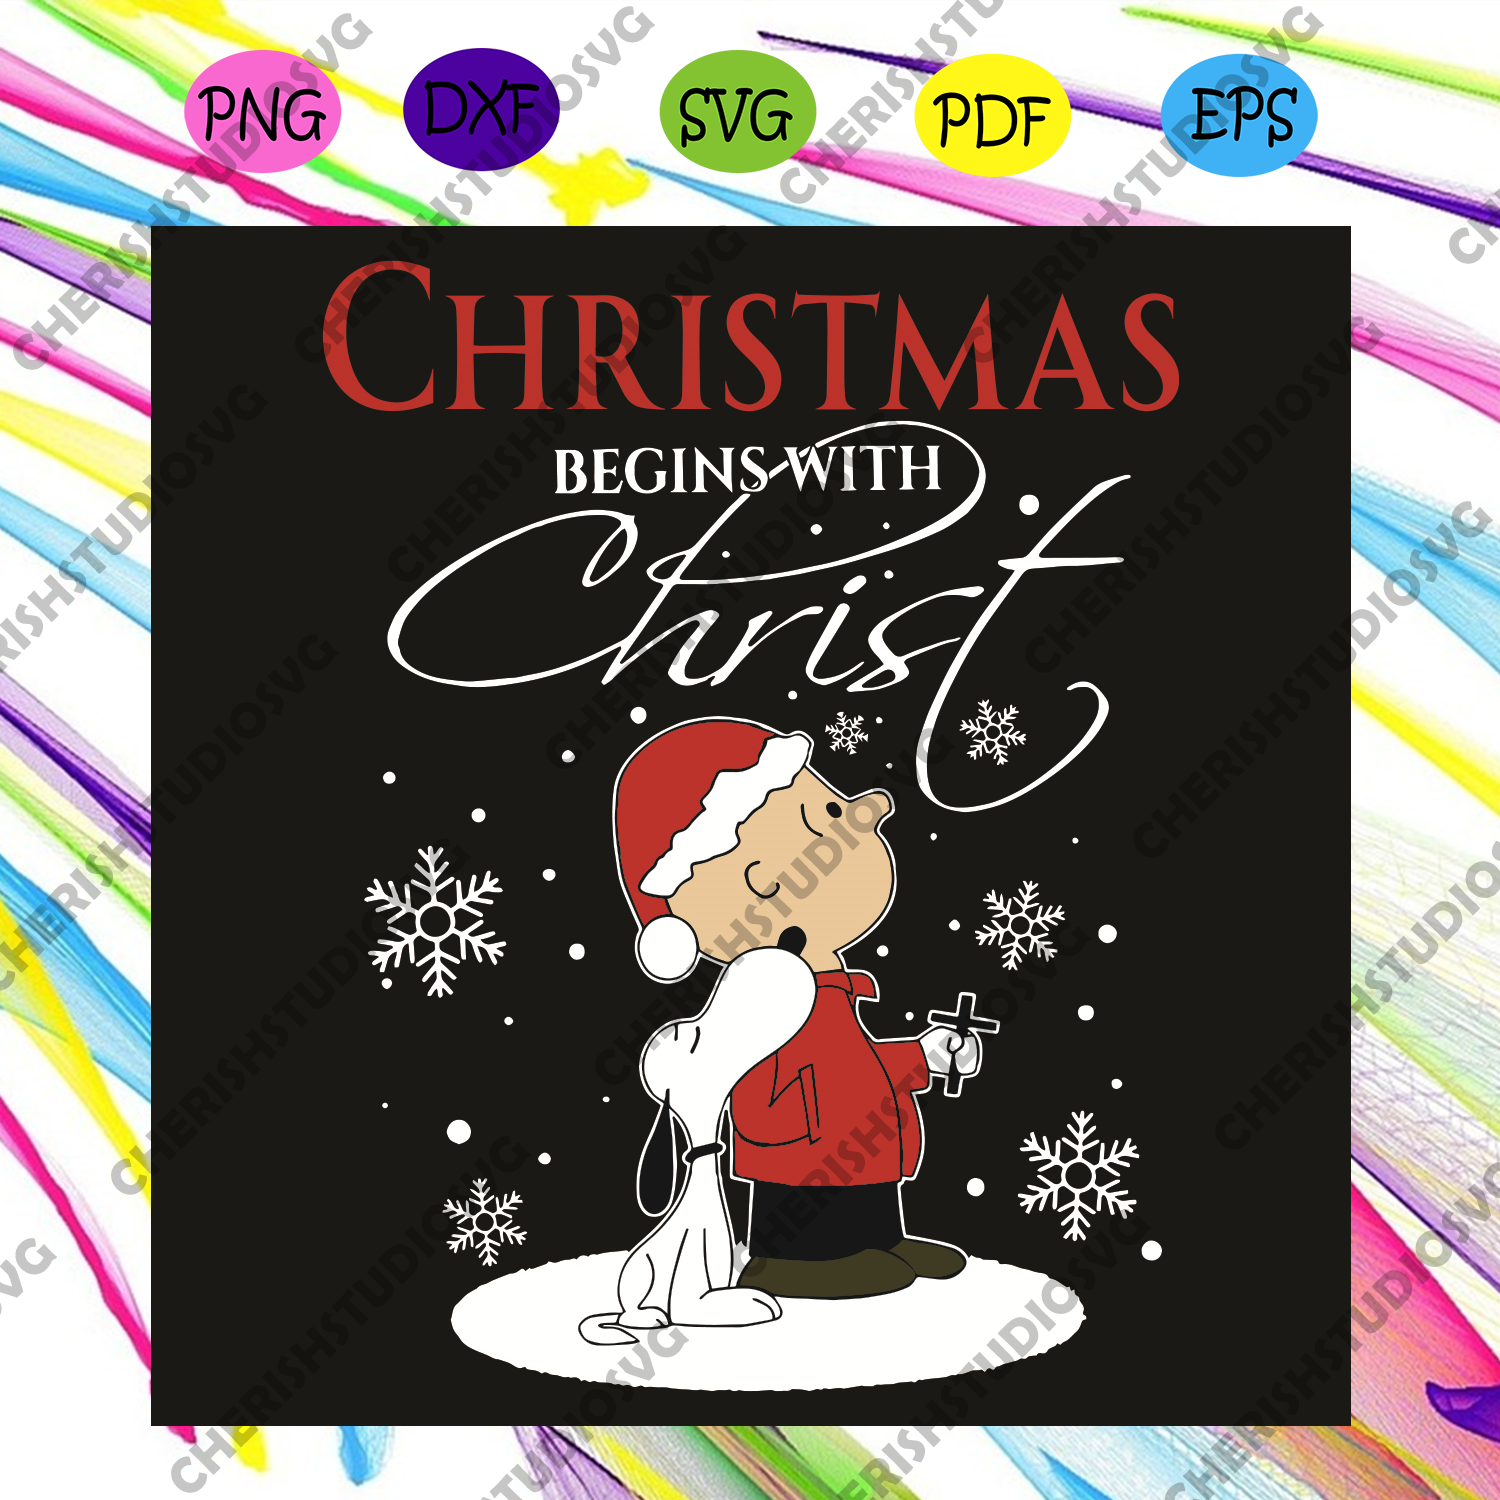 Download Christmas Begins With Christ Svg Christmas Svg Christmas Begins With Cherishsvgstudio